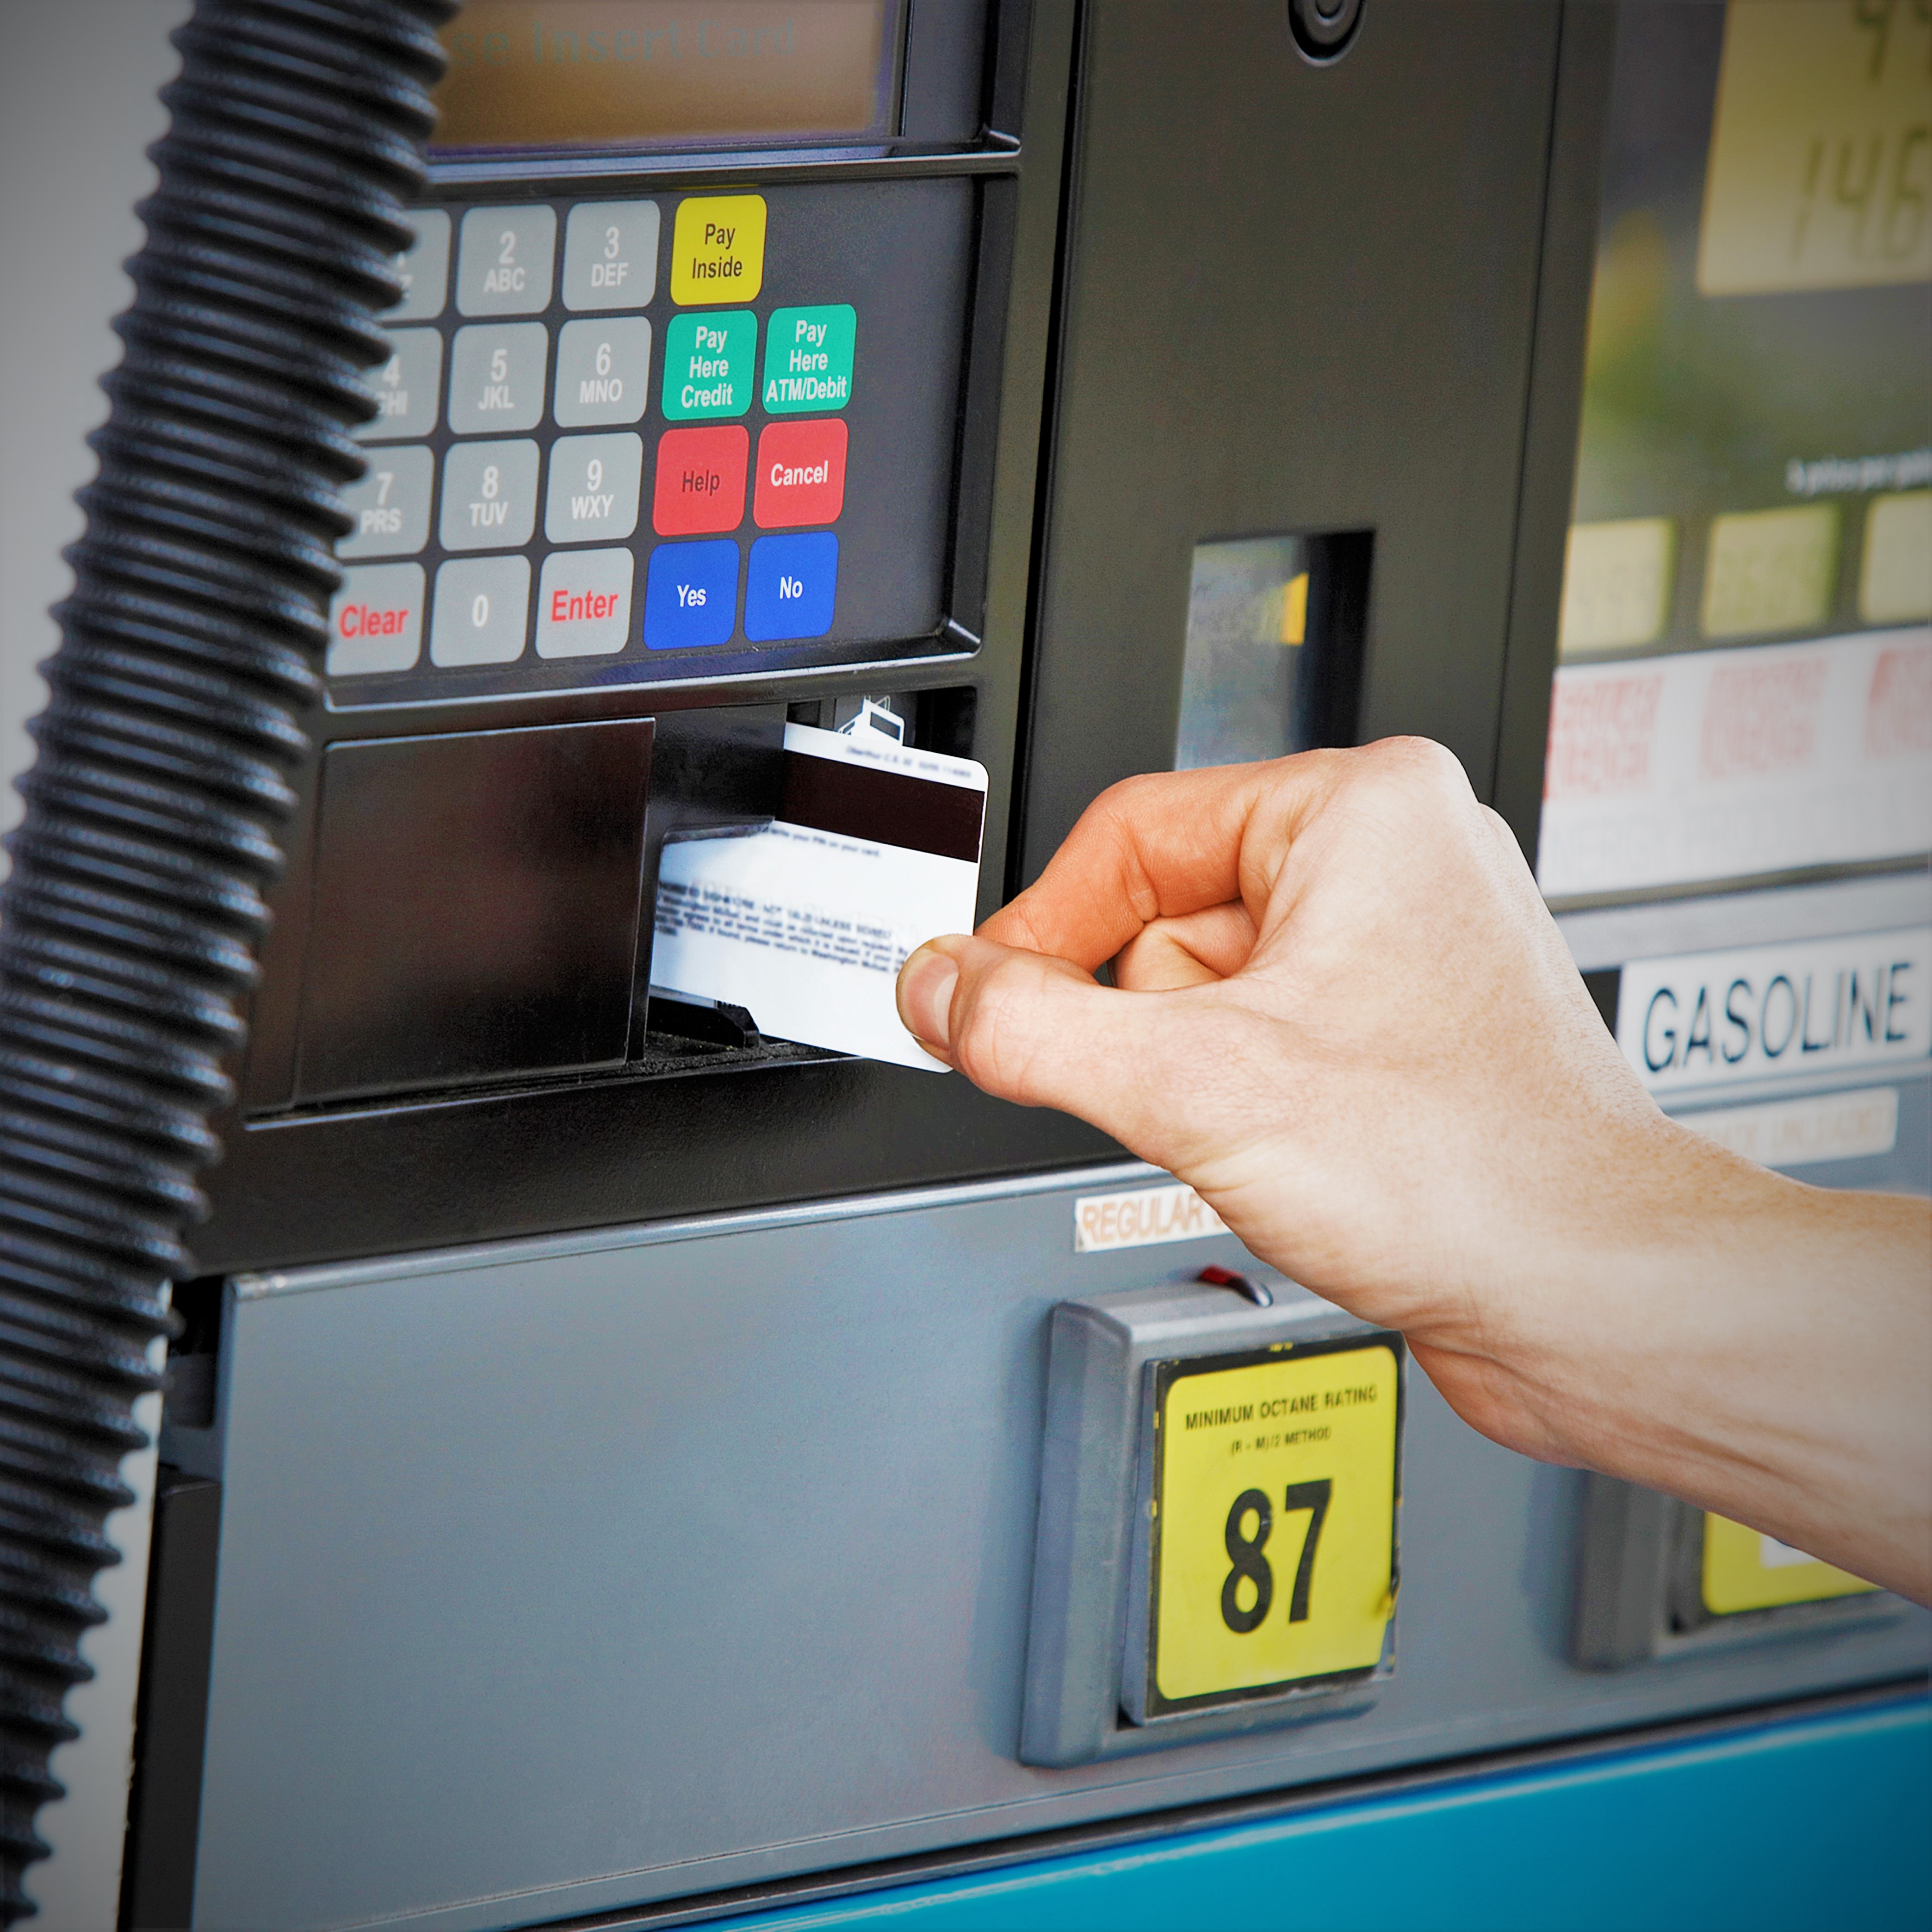 The decline of oil prices could push pump prices down in coming weeks